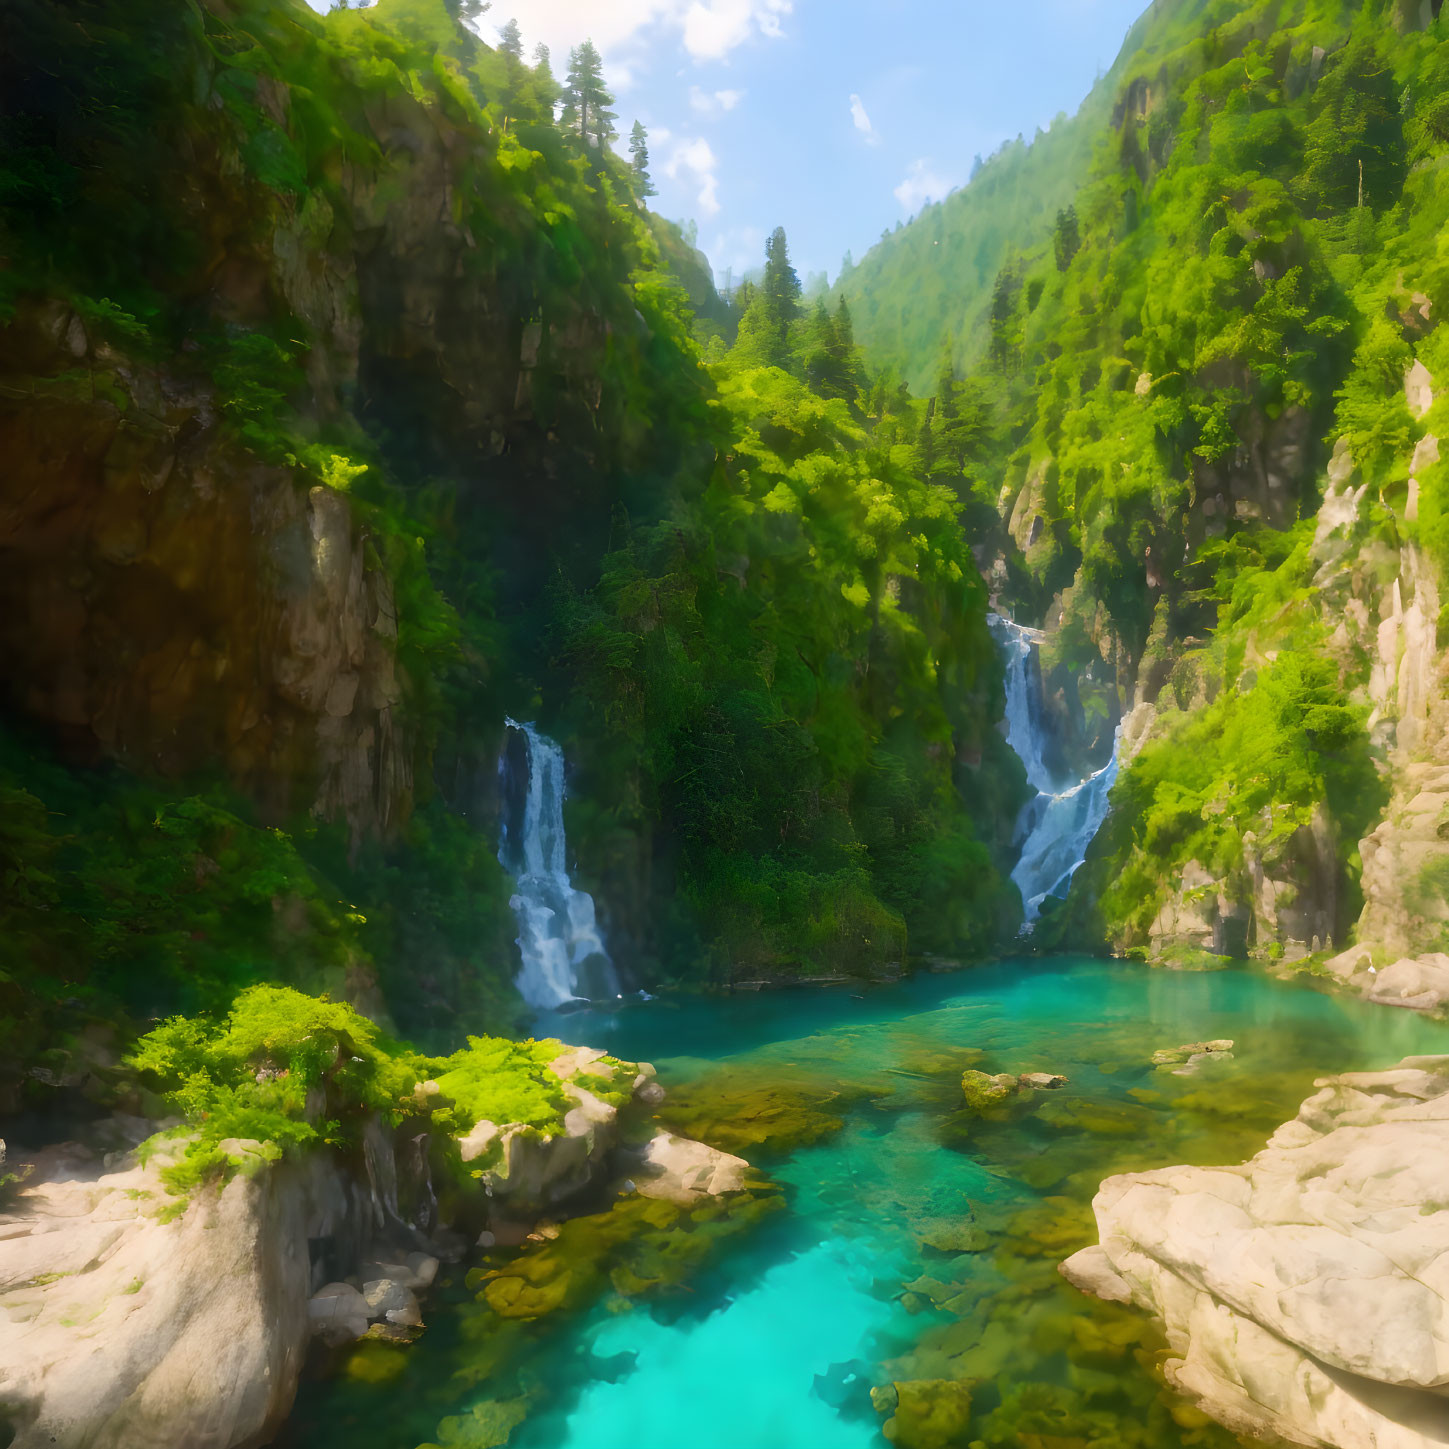 Tranquil valley with lush greenery, turquoise pool, waterfalls, rocky outcrops,